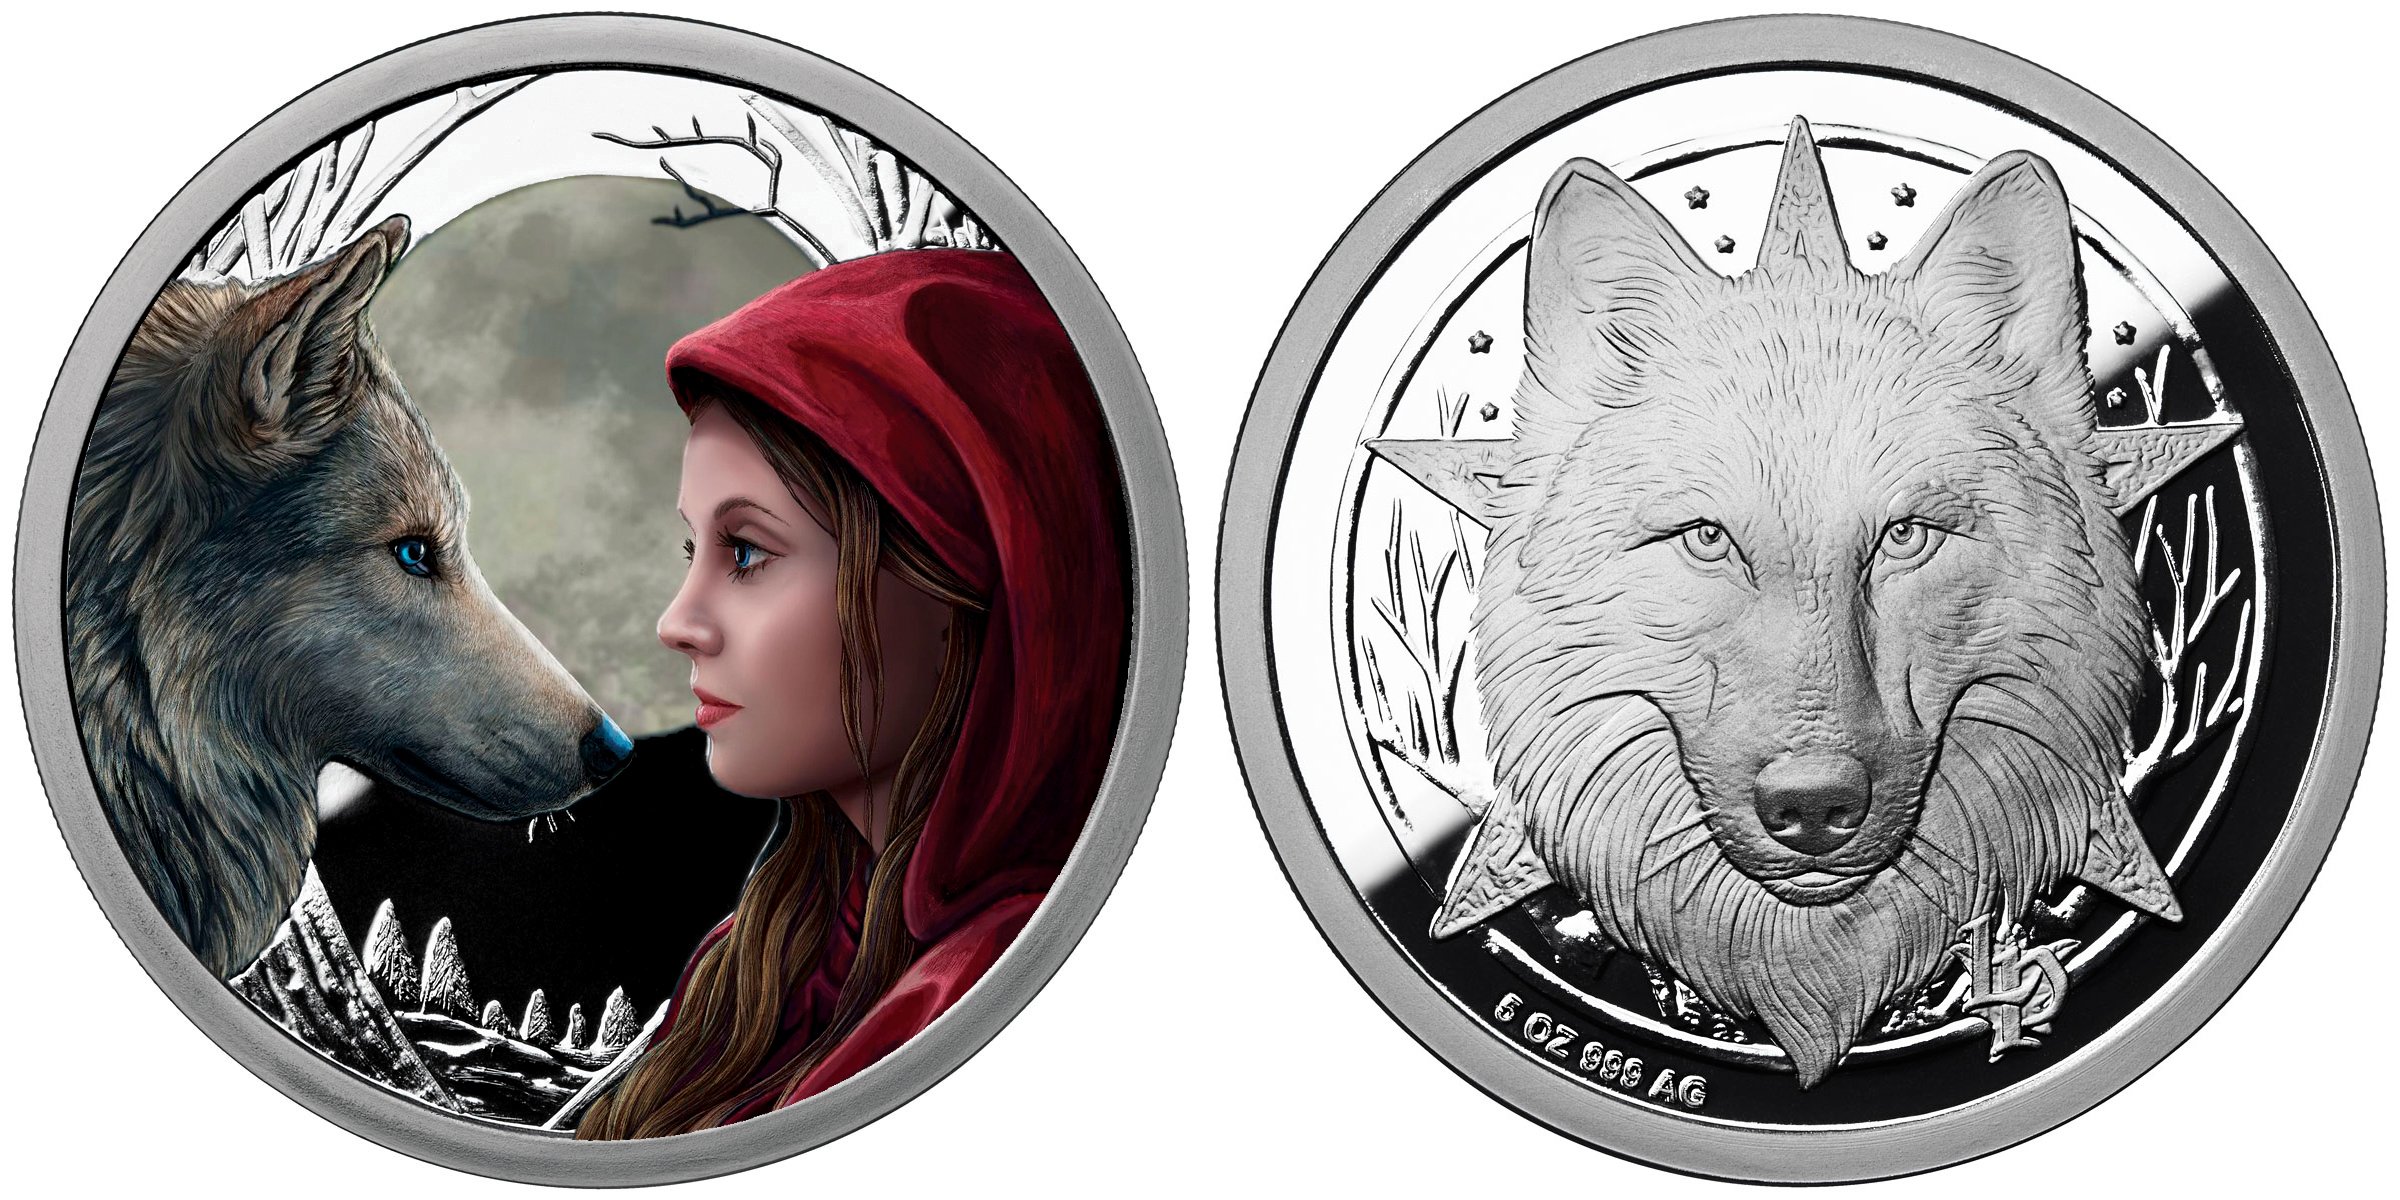 Moonstruck - Color Obverse and Reverse